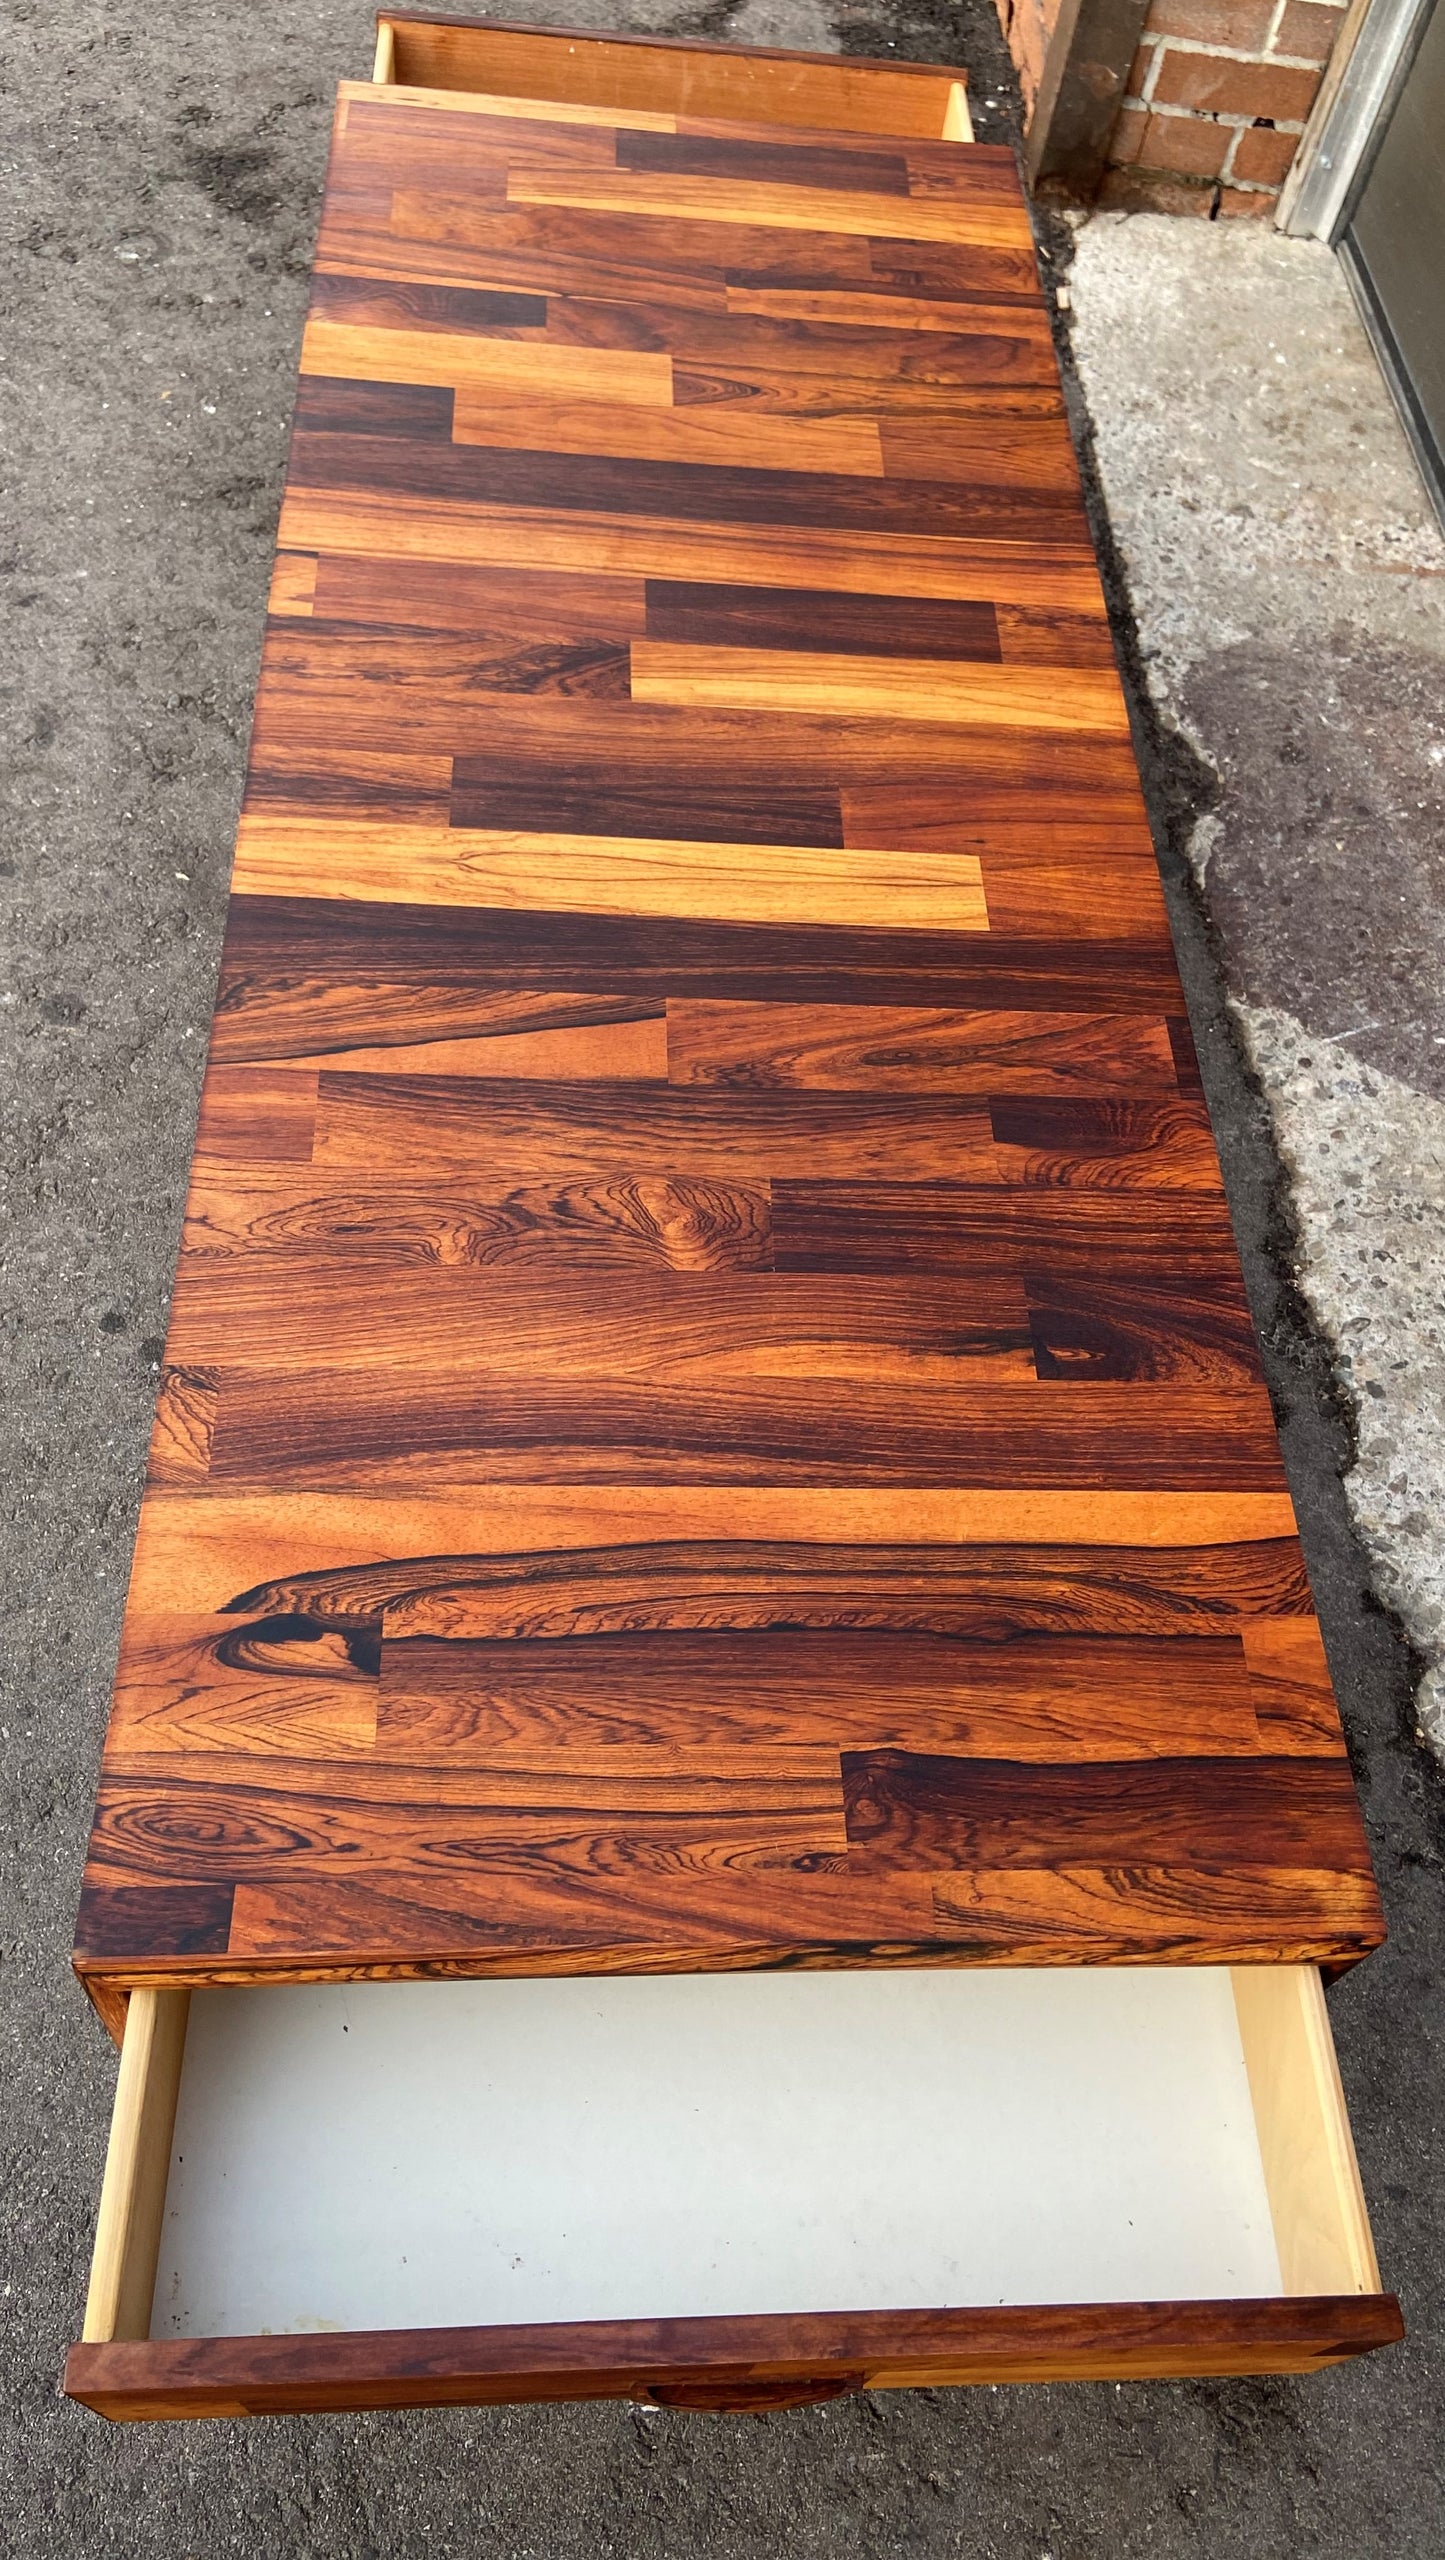 REFINISHED MCM Rosewood Coffee Table 60" low, PERFECT